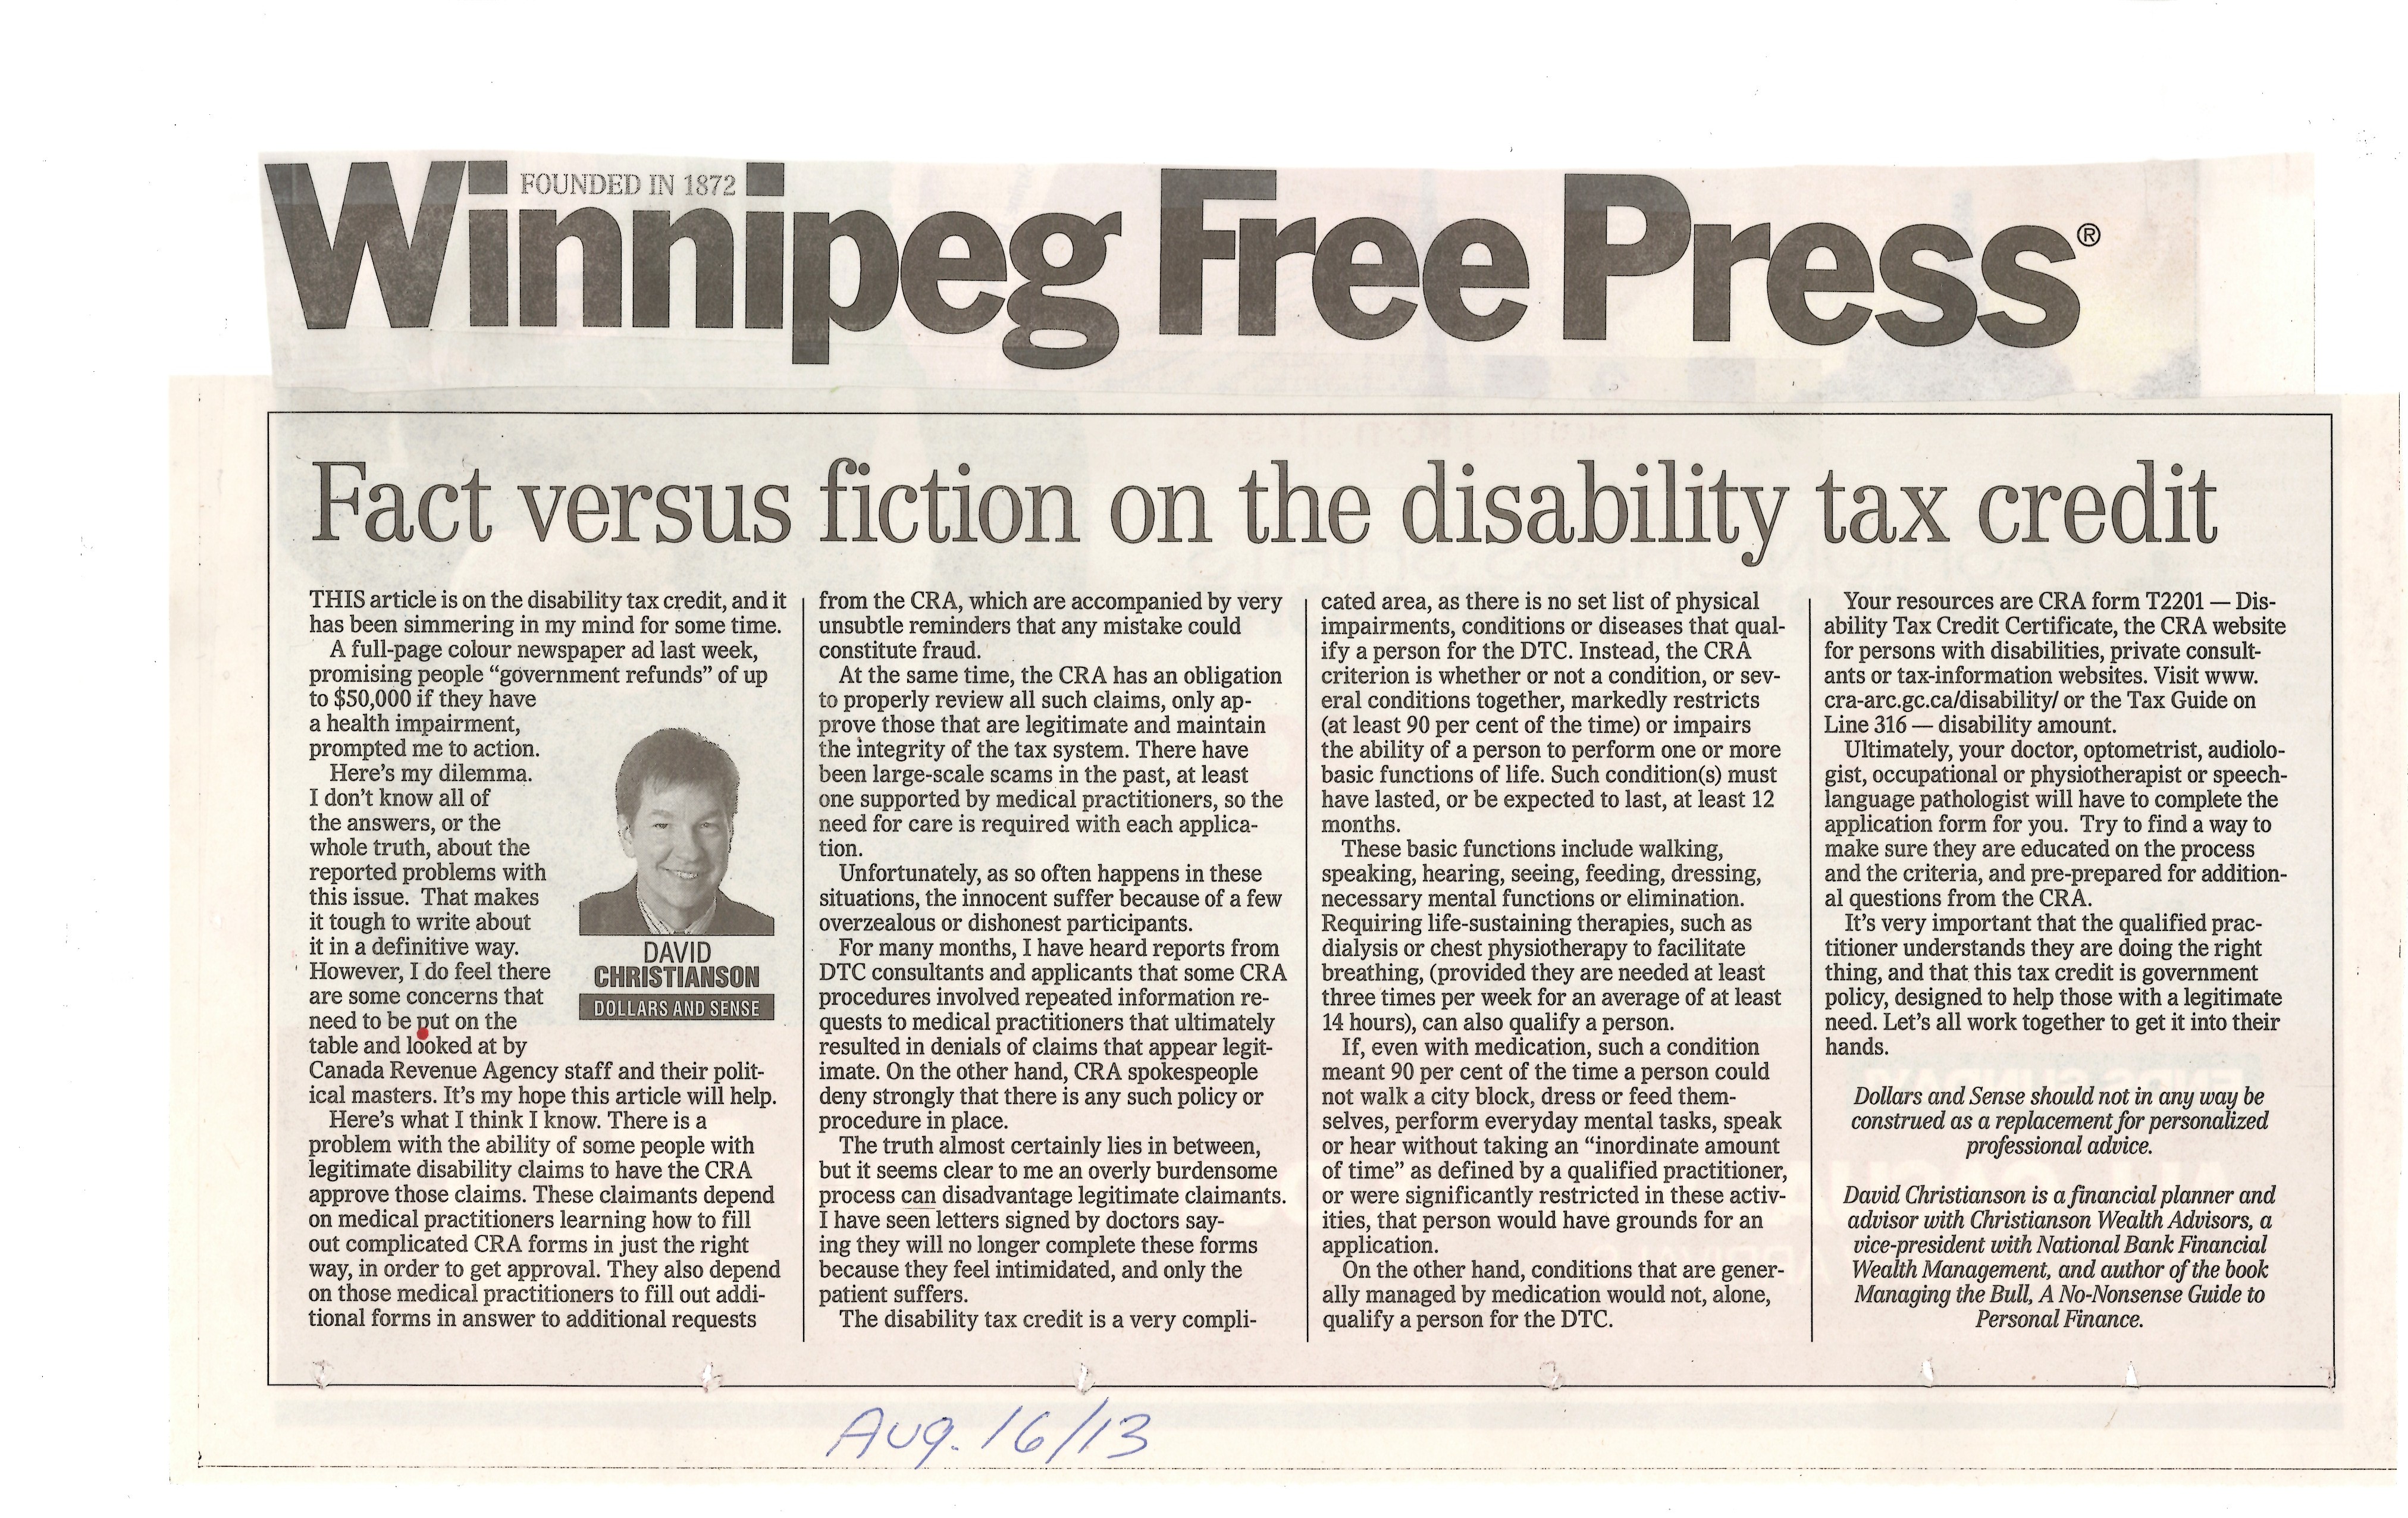 Winnipeg Free Press Article about Disability Tax Credits and their complexity